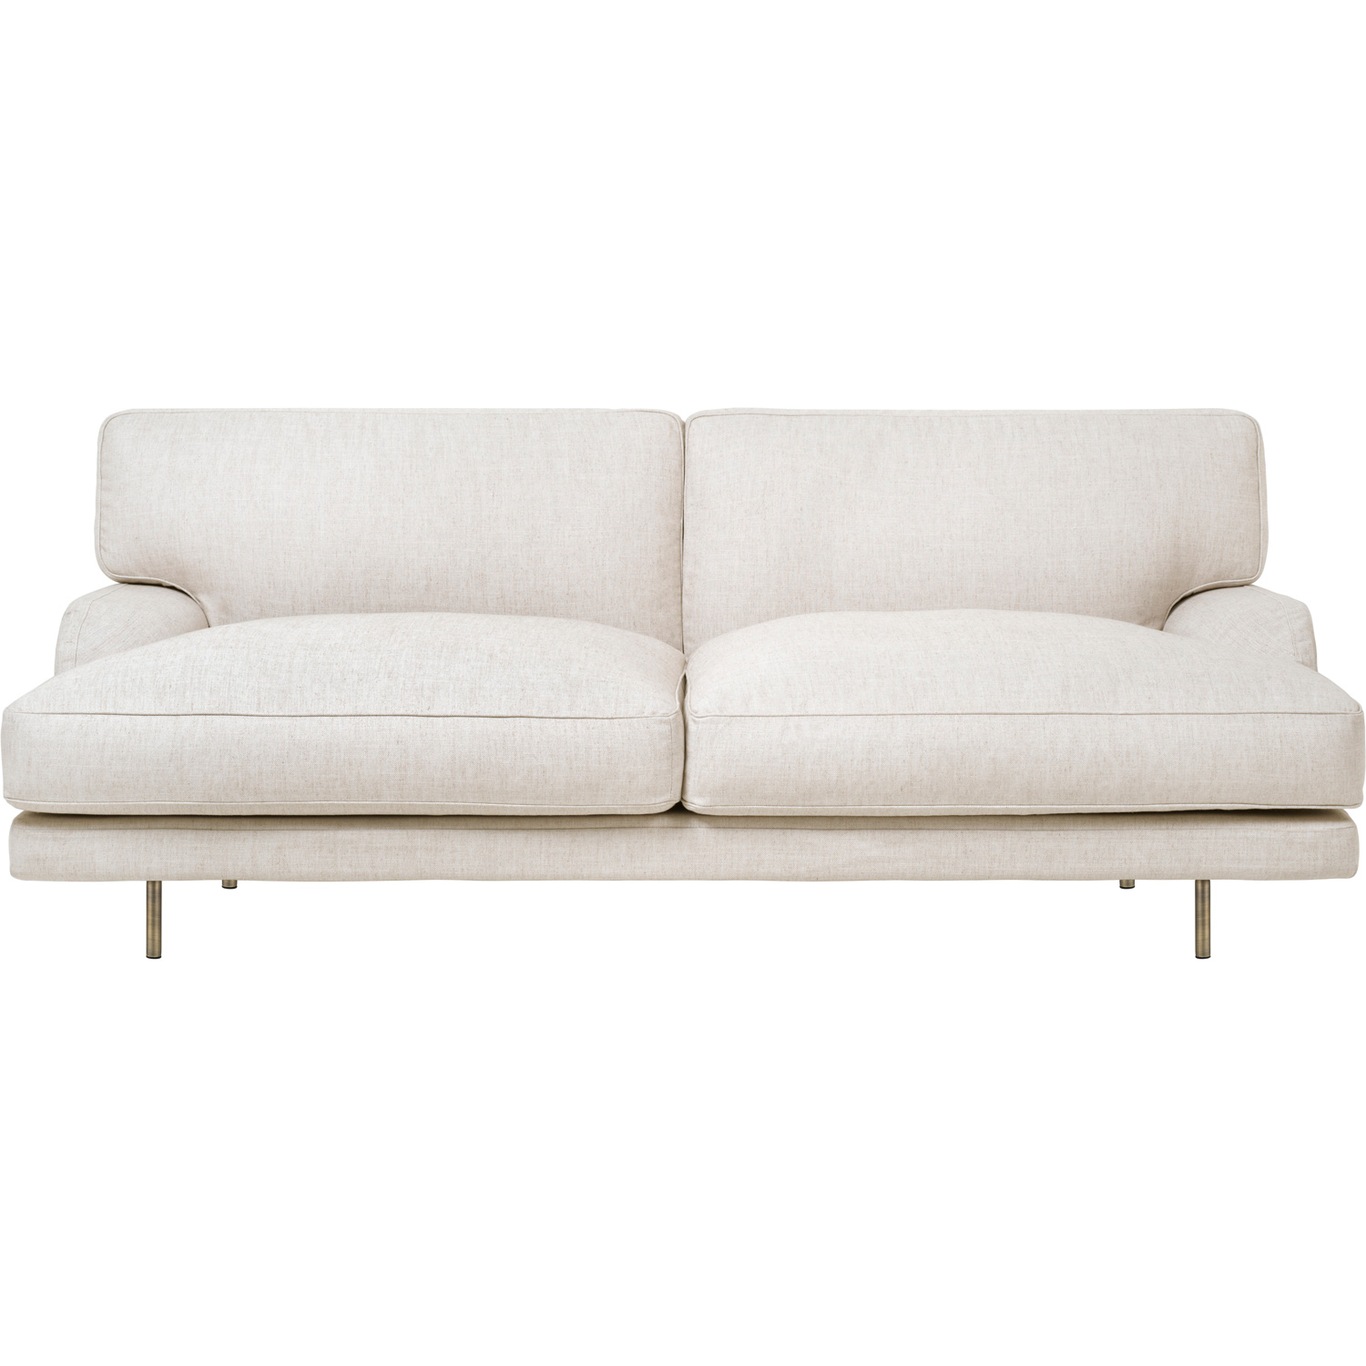 Flaneur Sofa LC 2,5-seters, Ben Messing / Hot Madison 419 Off White